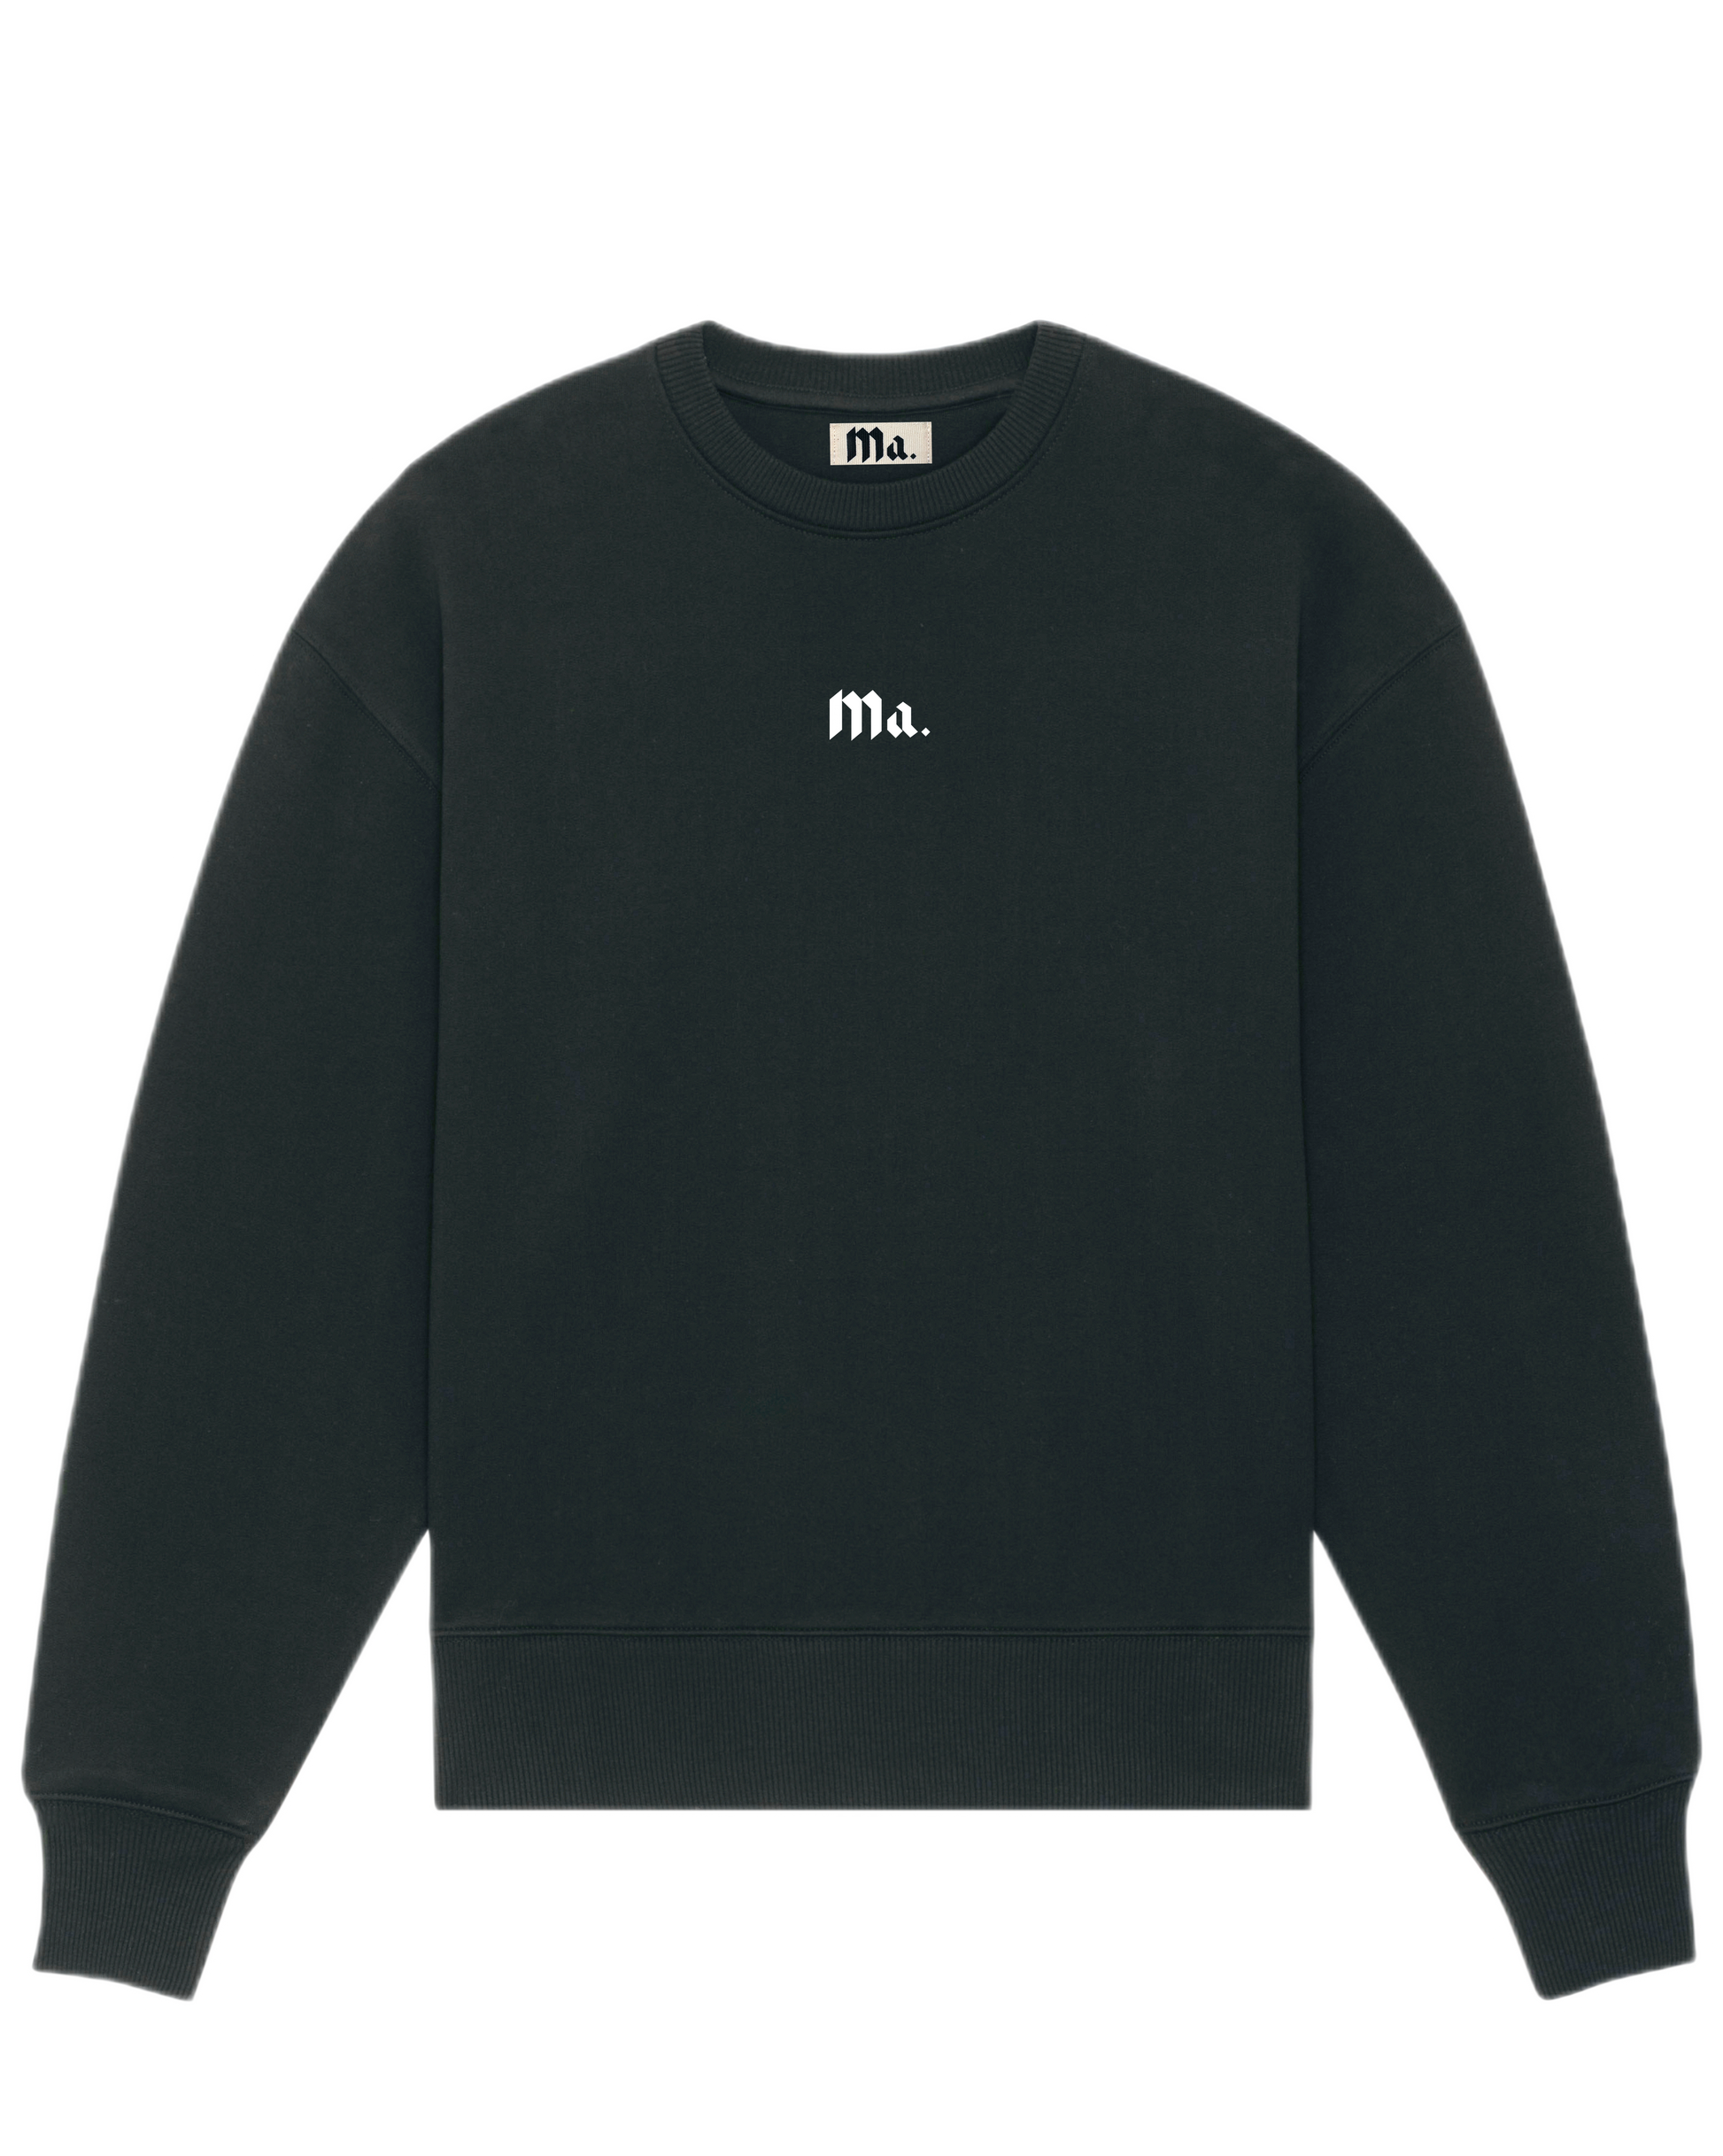 Heavyweight more amoure crewneck in black with a central mini logo design 